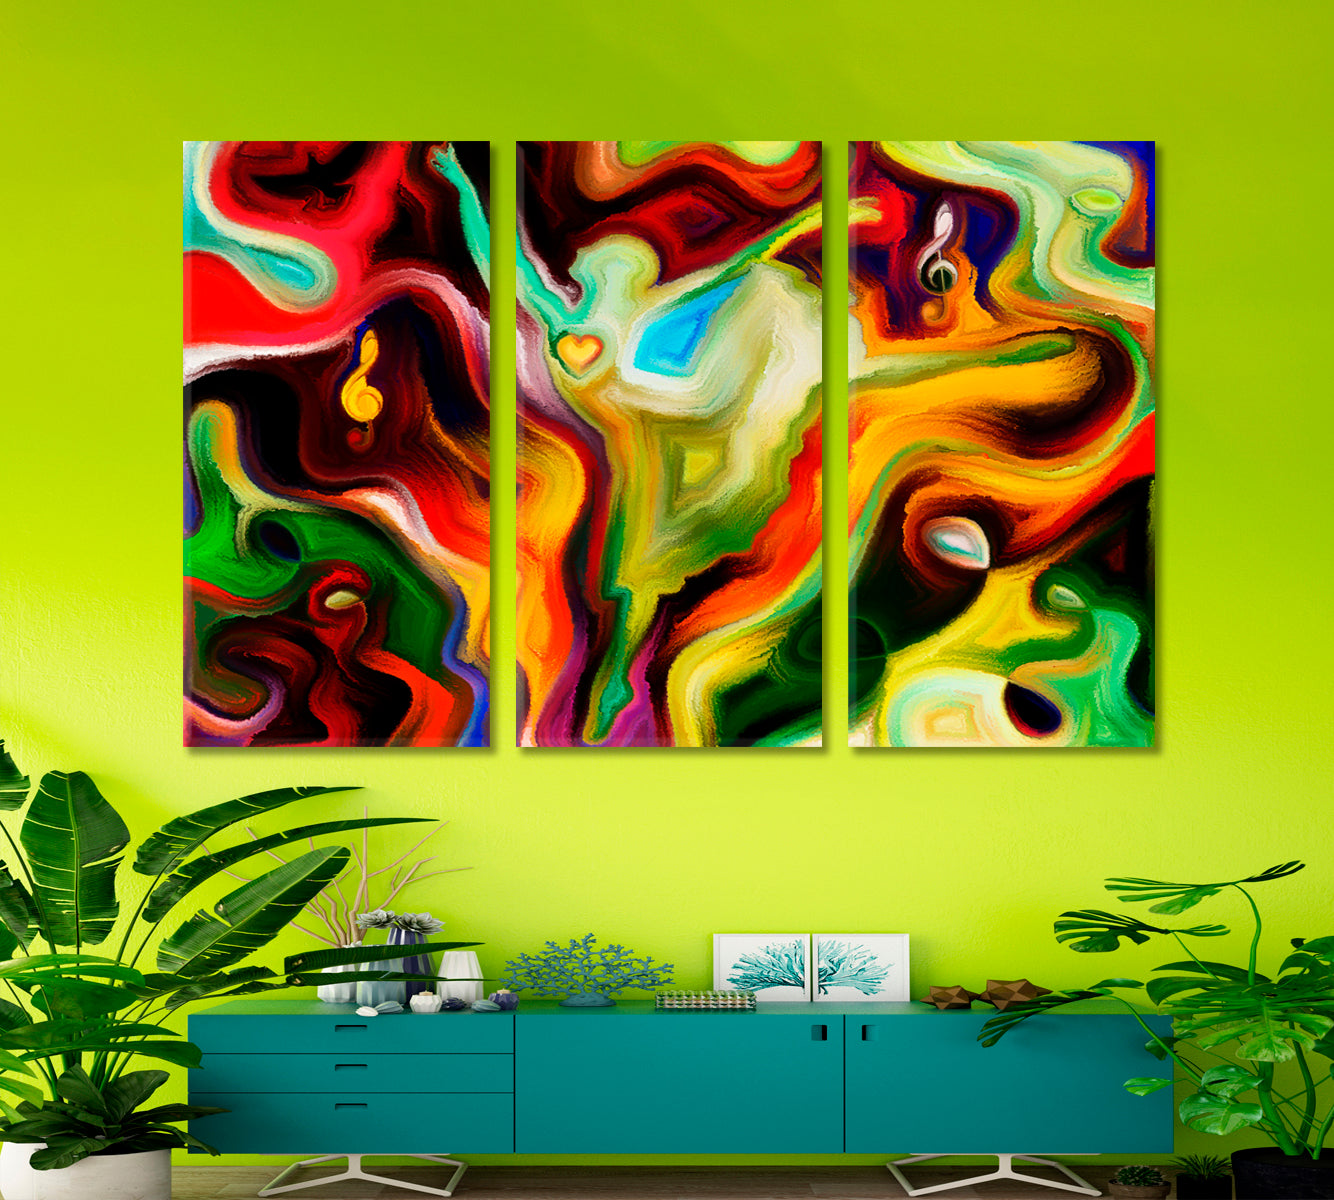 Music Ballet In Vibrant Abstract Shapes Abstract Art Print Artesty 3 panels 36" x 24" 